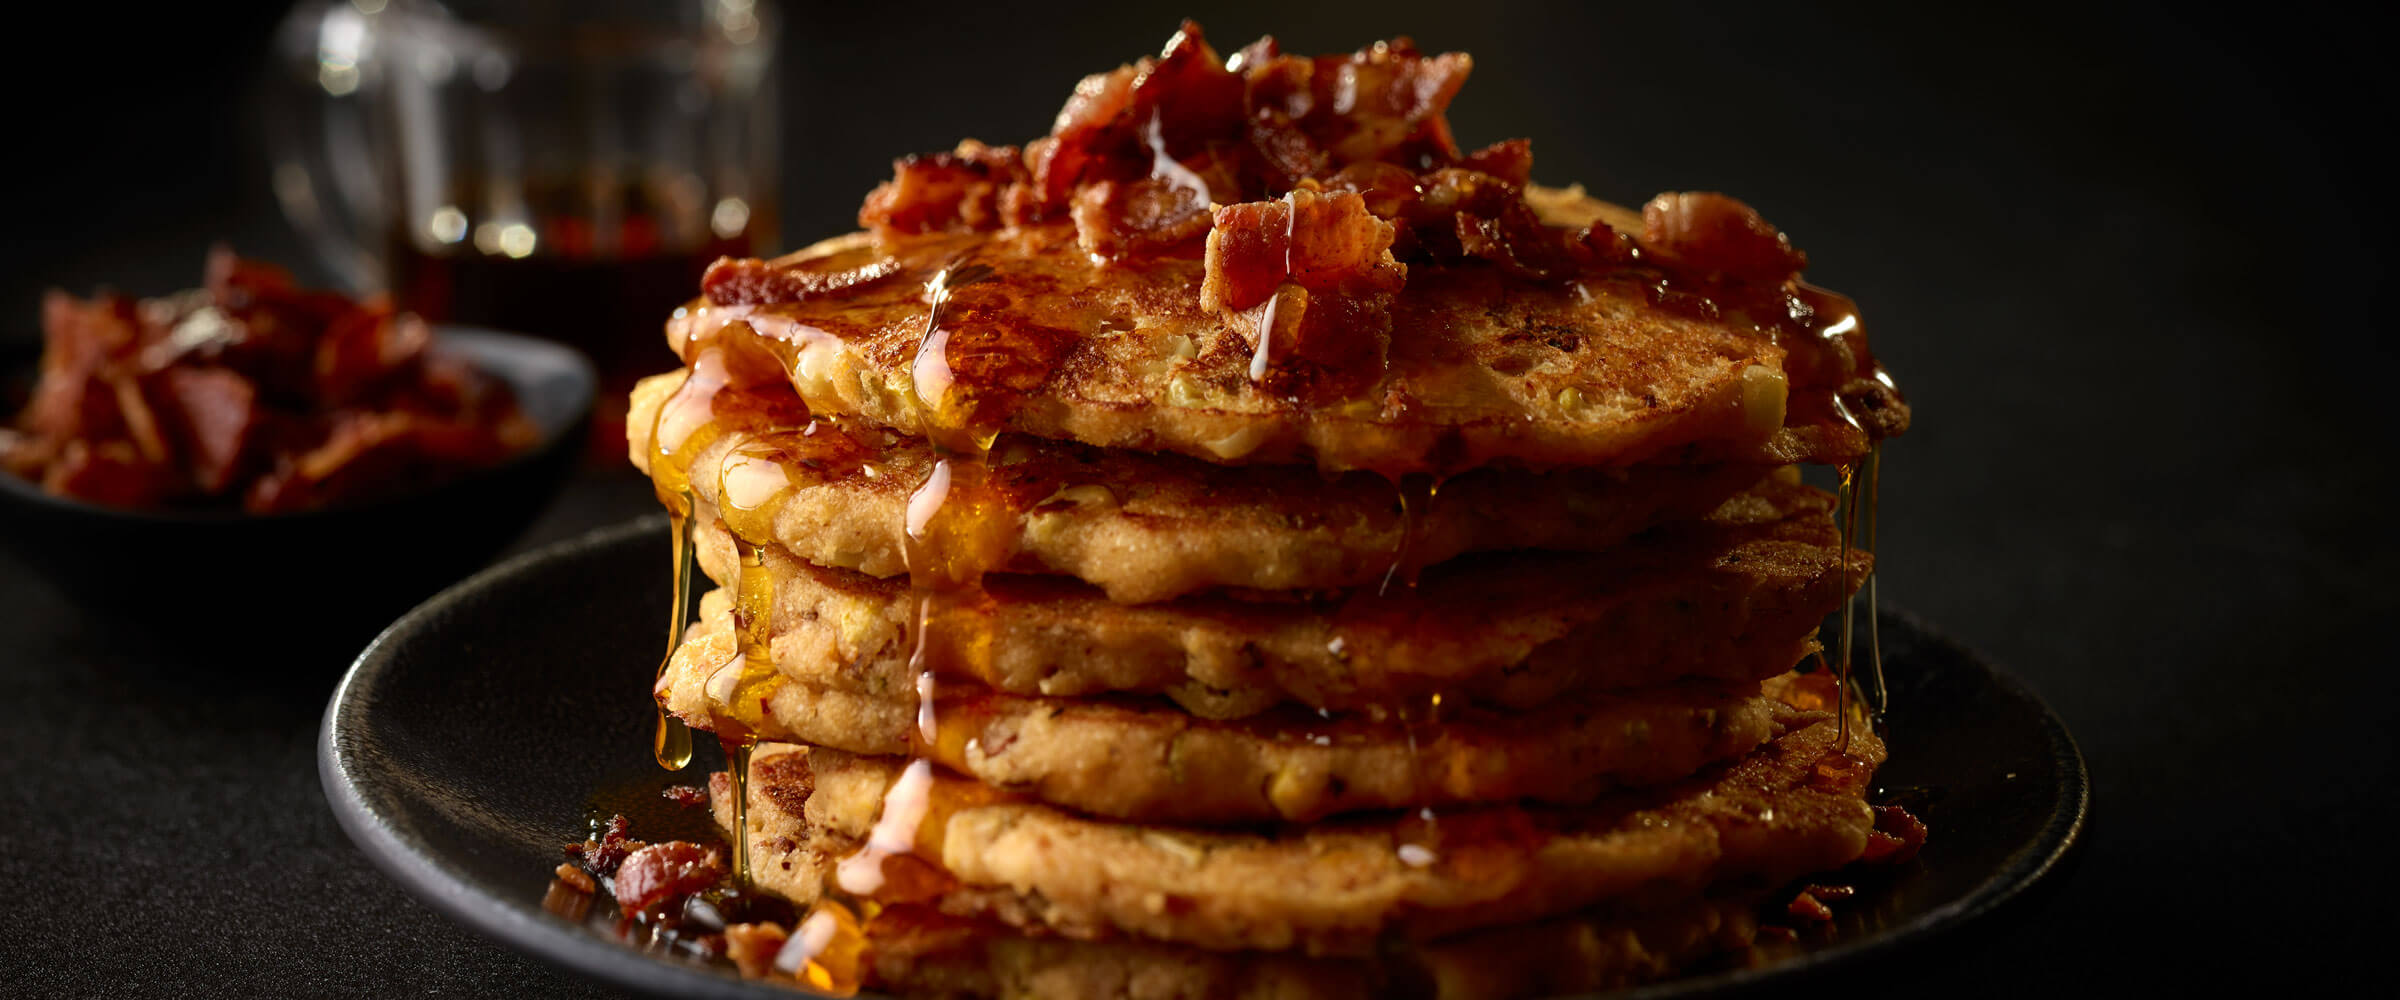 Bacon and Corn Griddle Cakes piled high topped with bacon and syrup